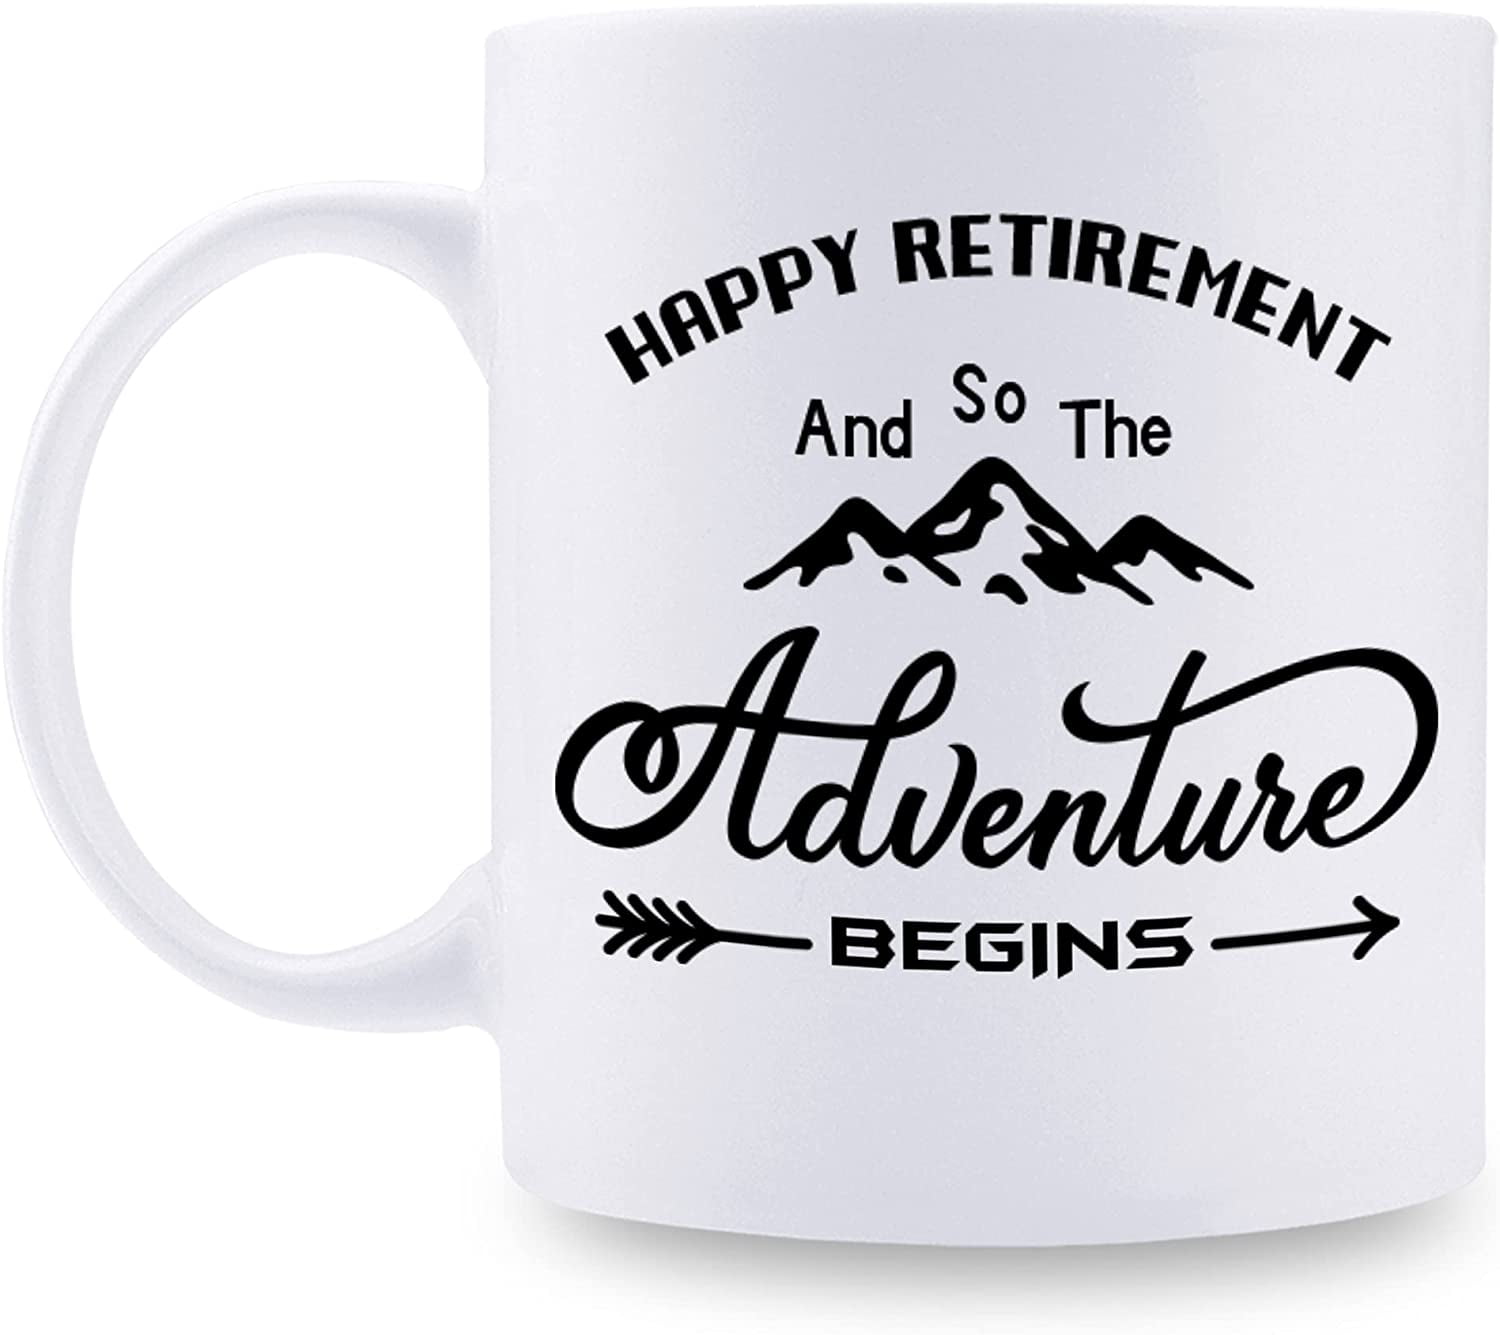 25 Great Last-Minute Retirement Gift Ideas | Cake Blog | Cake: Create a  Free End of Life Plan